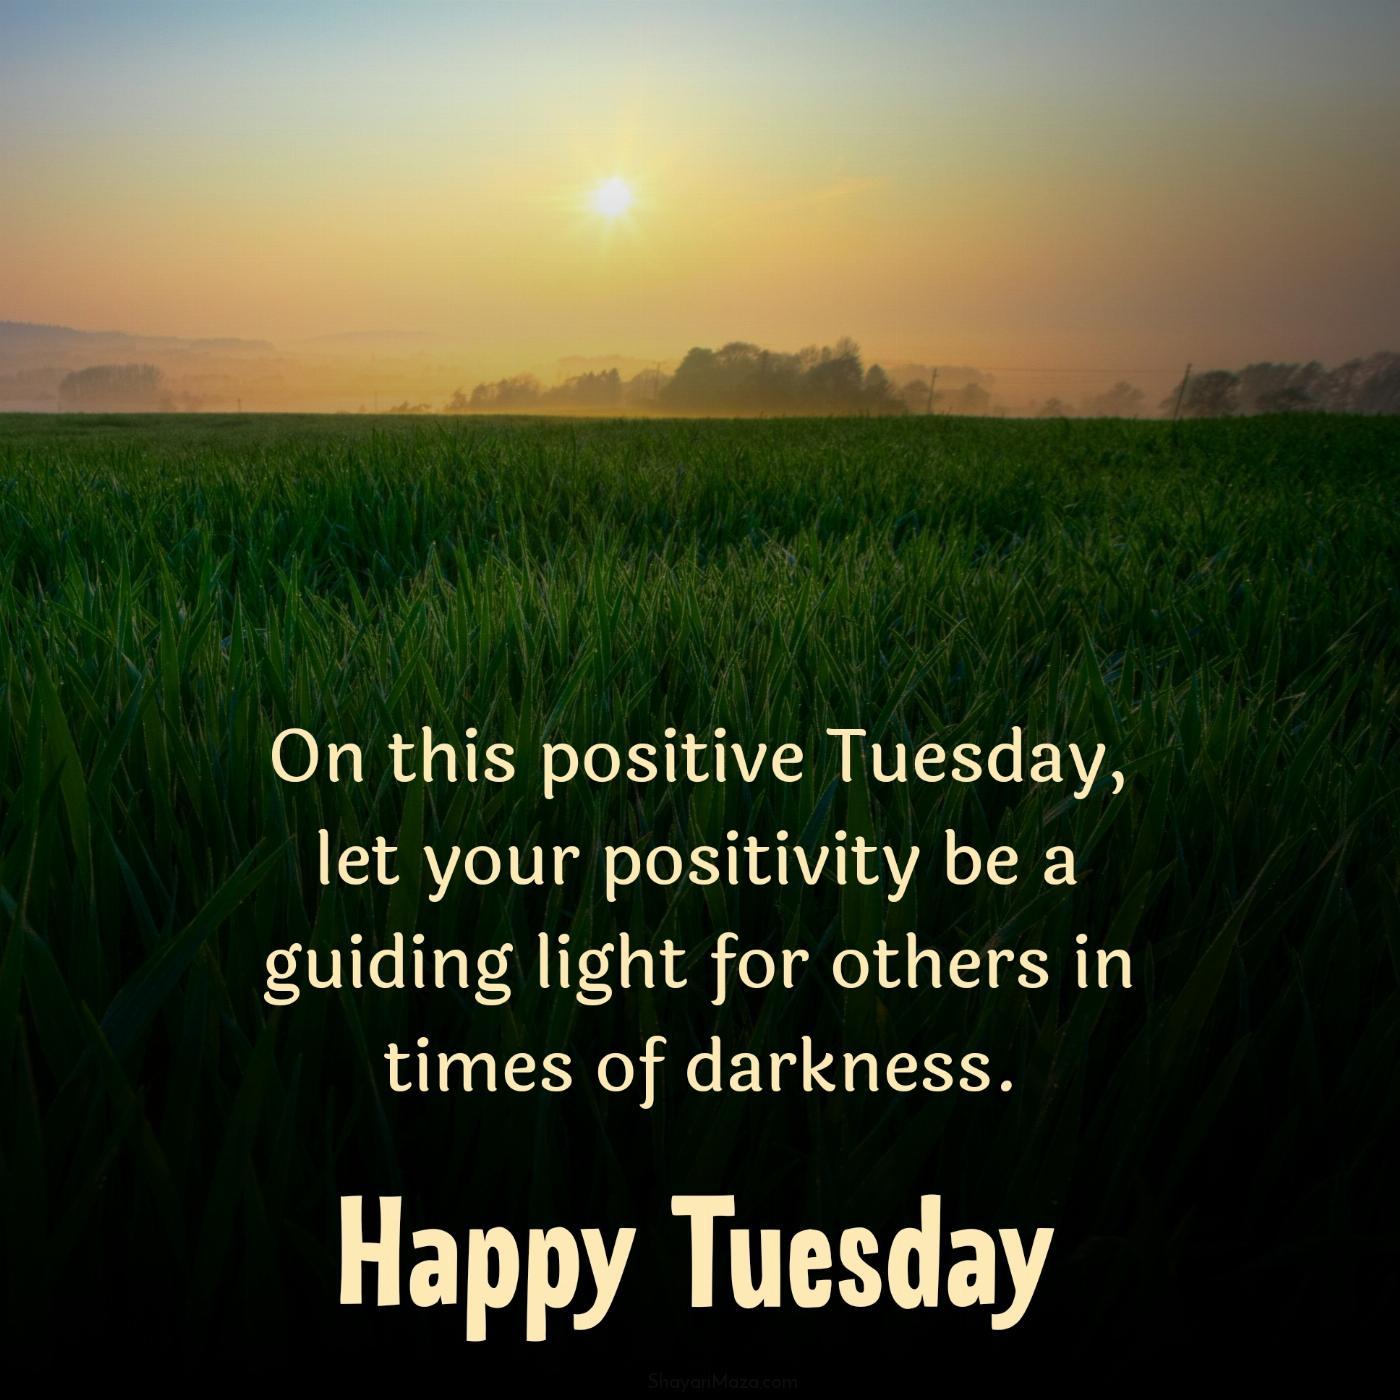 On this positive Tuesday let your positivity be a guiding light